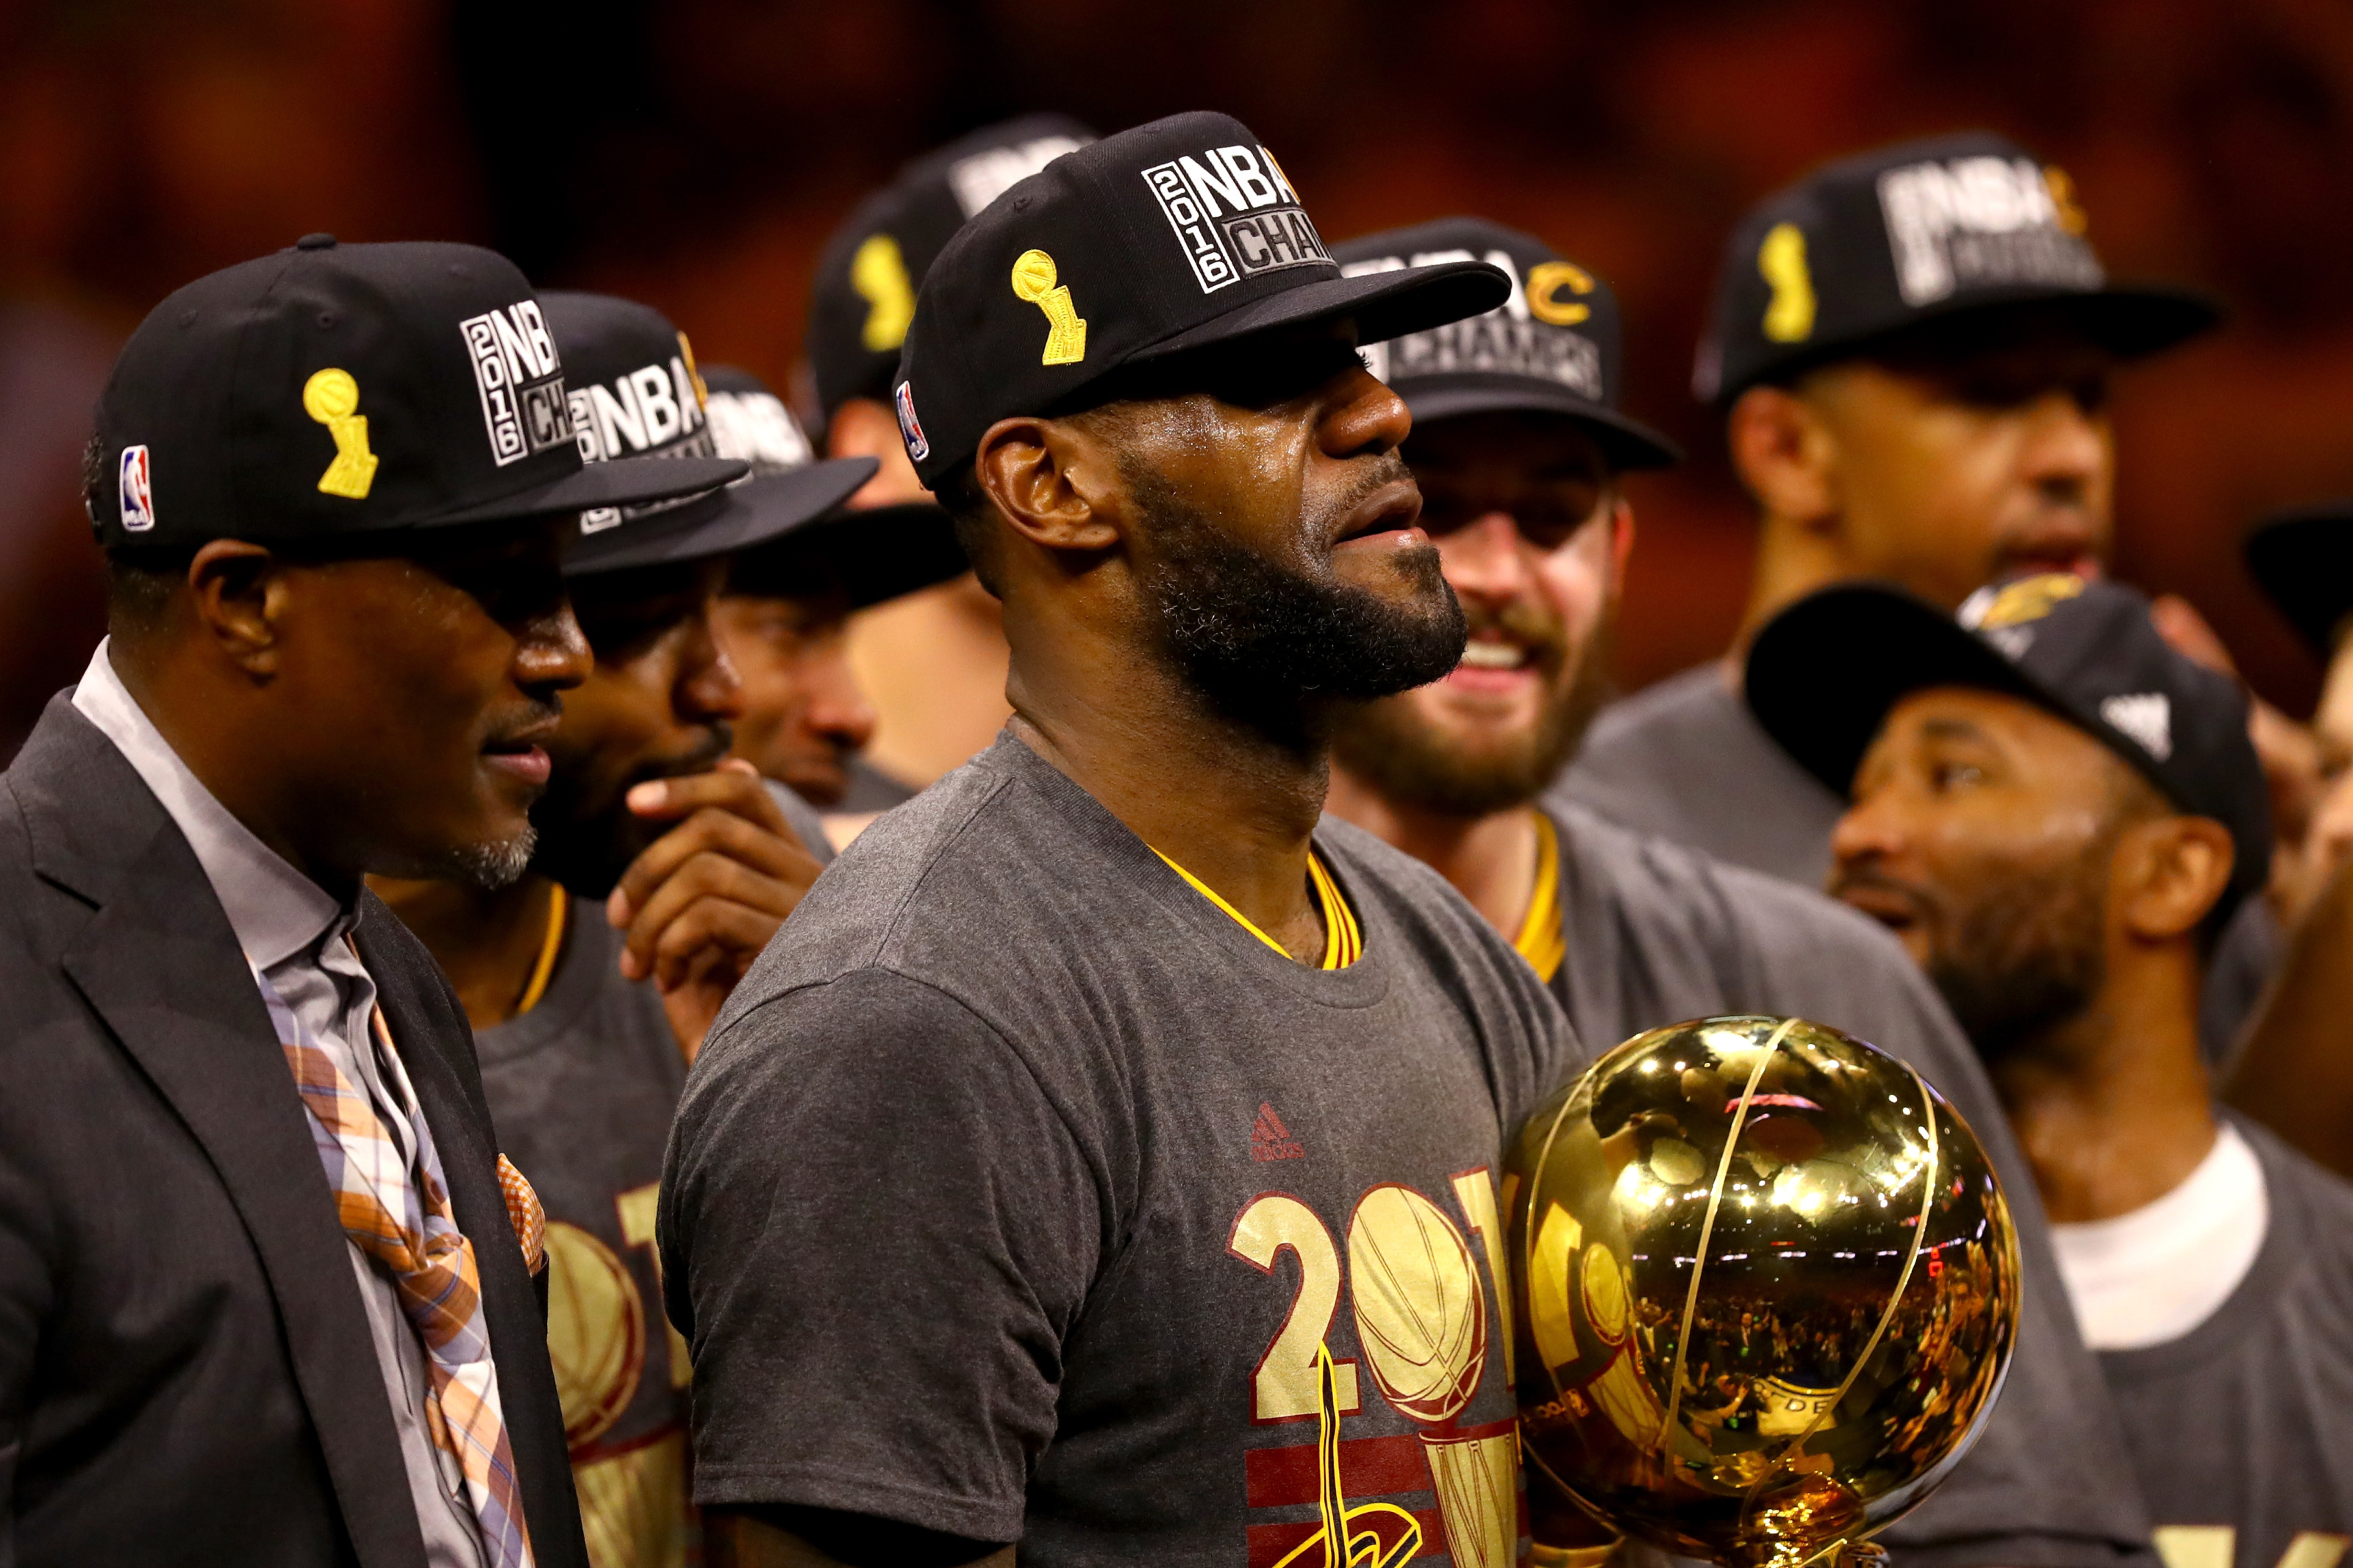 NBA finals: Leading Cleveland Cavaliers to historic win, LeBron